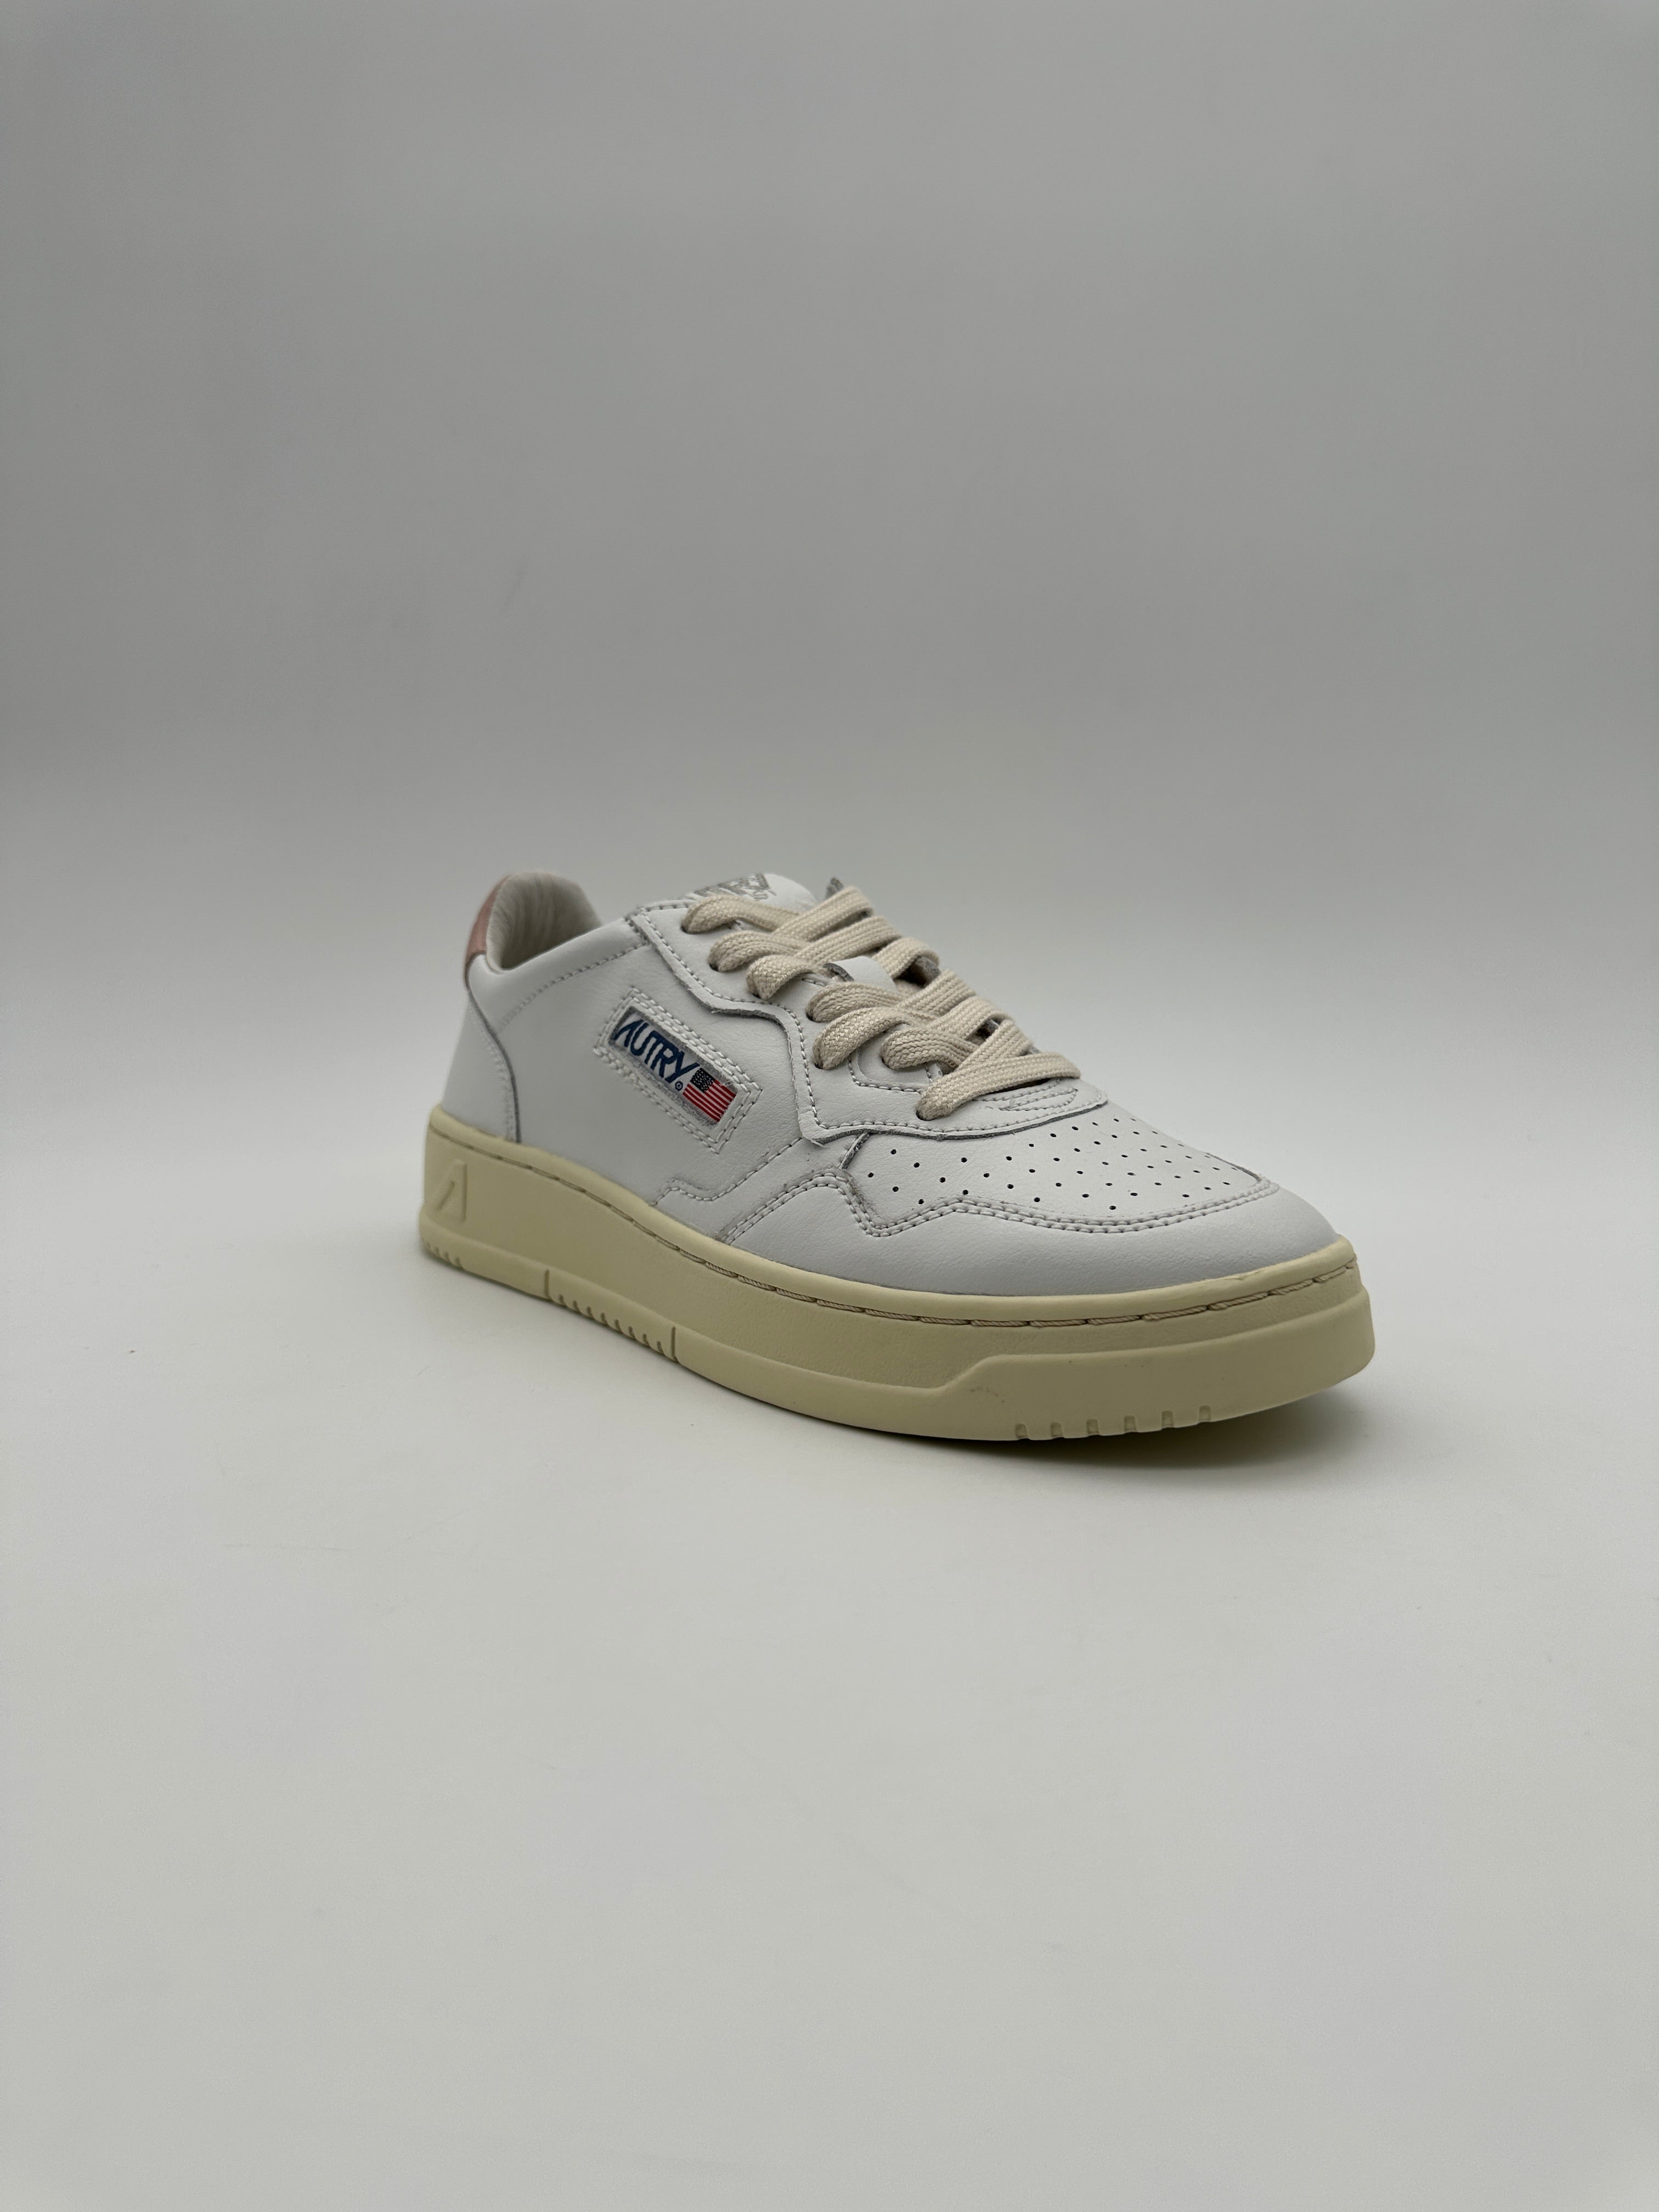 Autry 01 low Sneakers